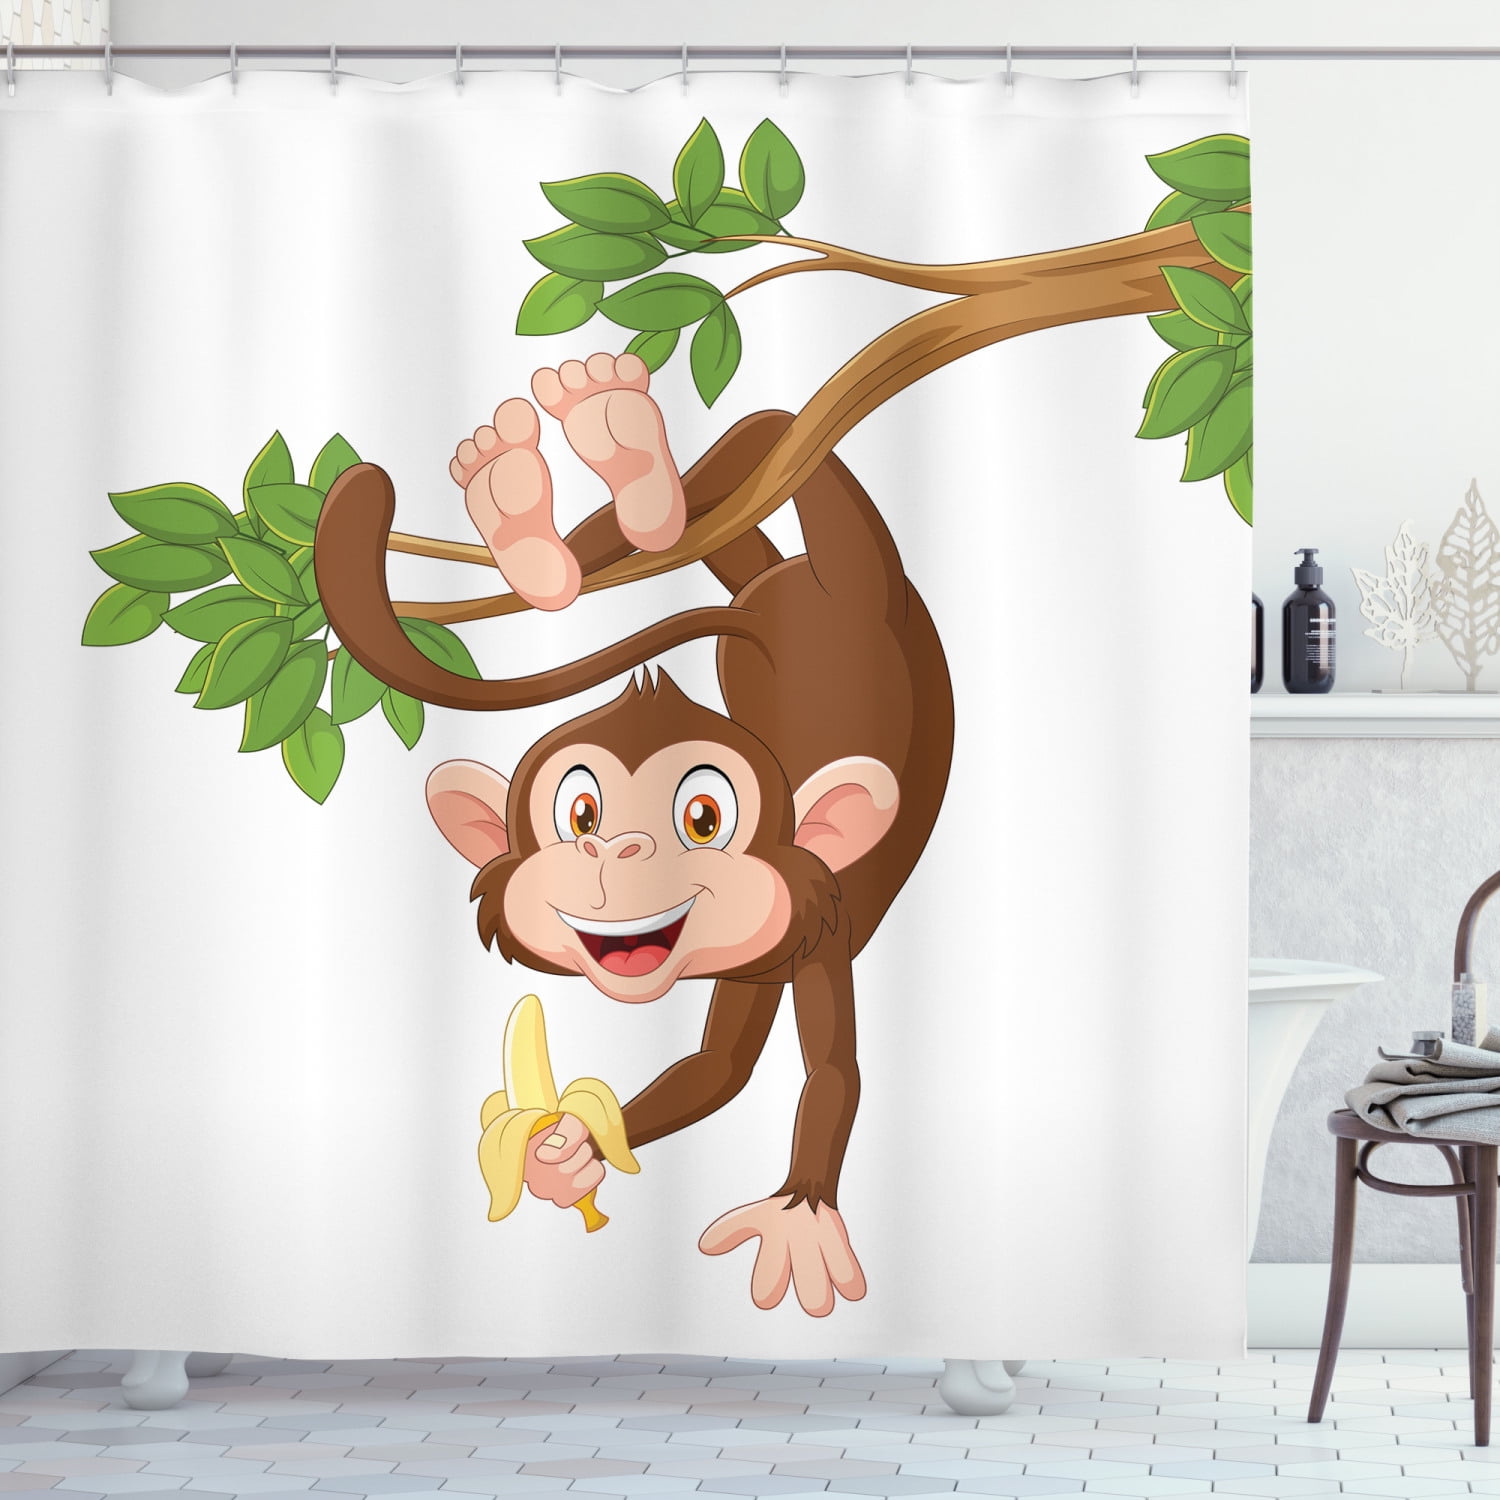 Cute Monkey in Jungle Fabric Shower Curtain Set Polyester Liner Bath Accessories 